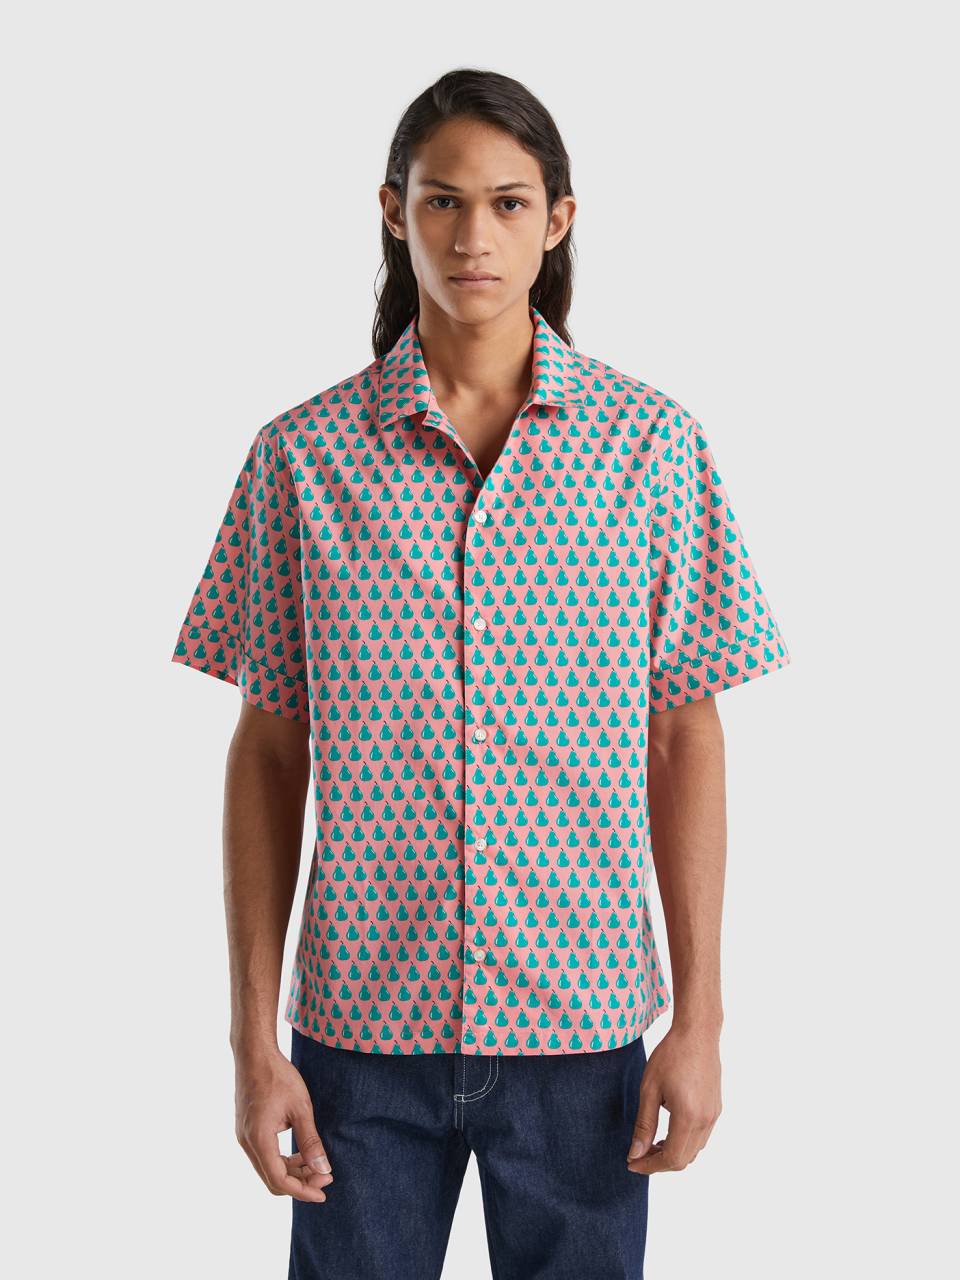 Benetton pink shirt with pear pattern. 1